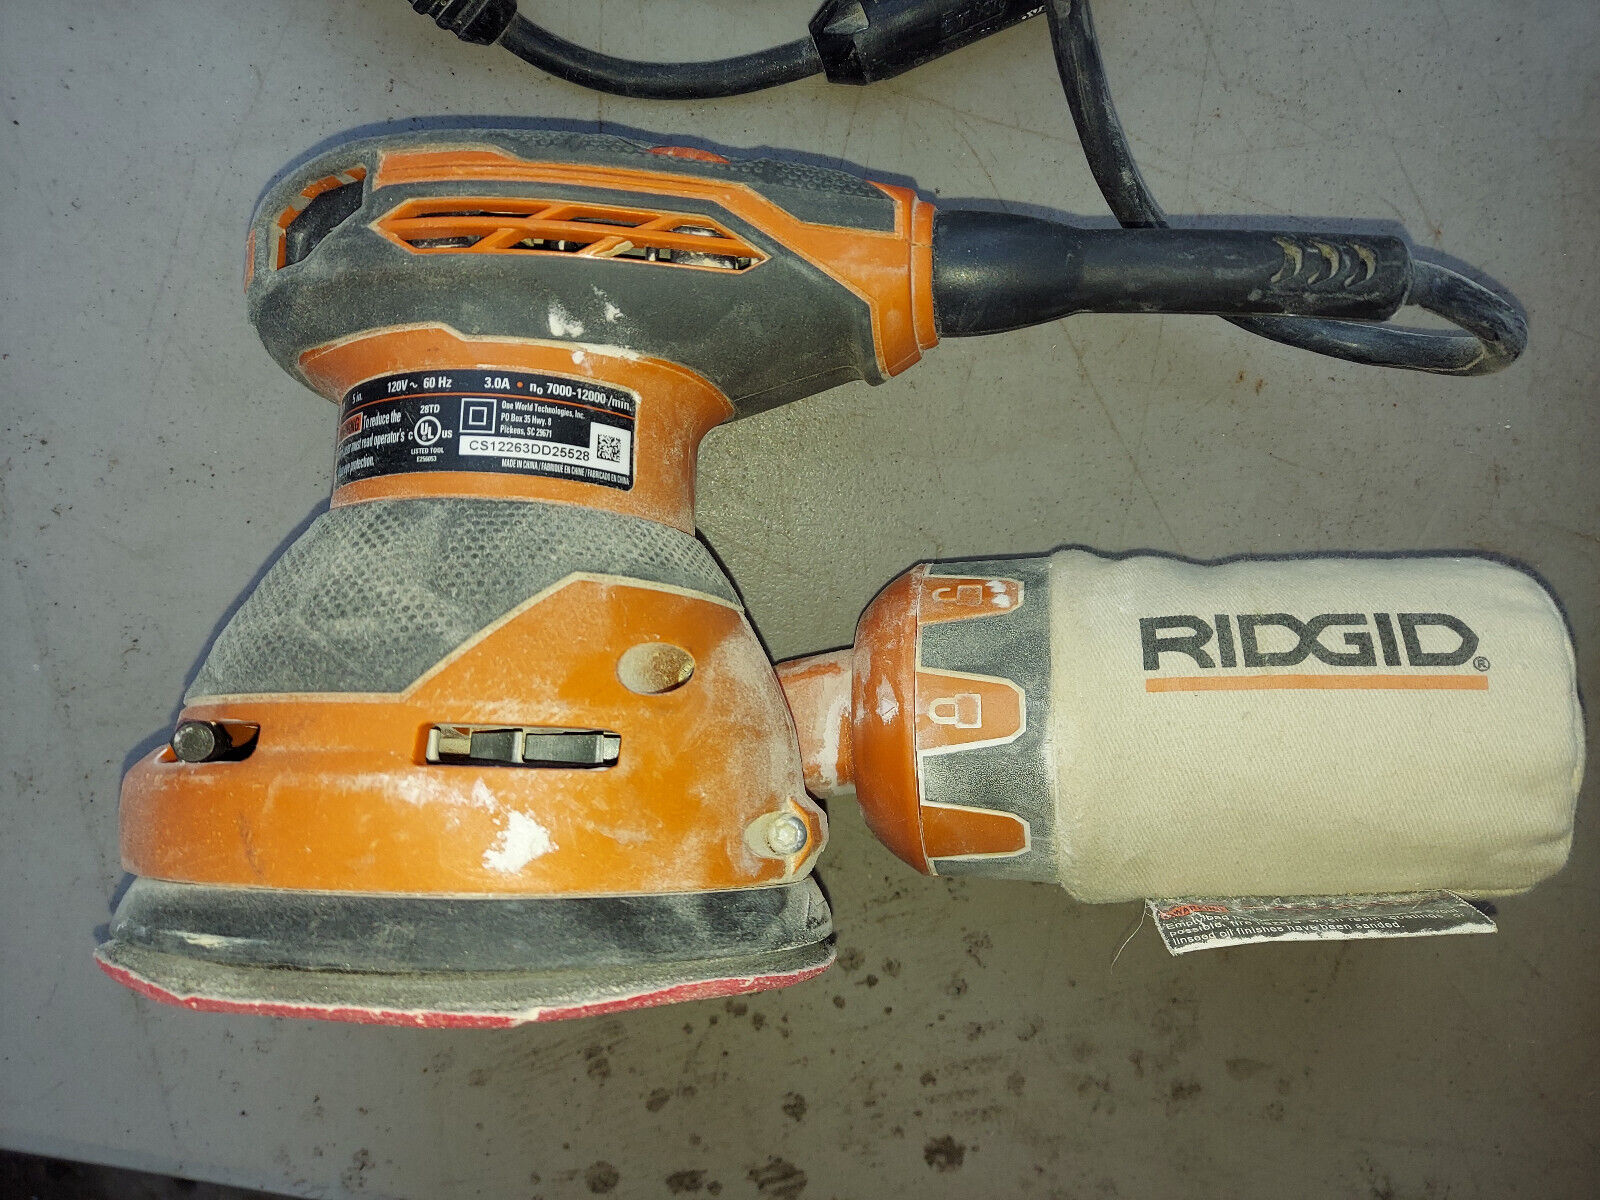 22PP21 RIDGID POWER SANDER, R2601, NOT USABLE (SPINS AT HIGH SPEED) - $13.95